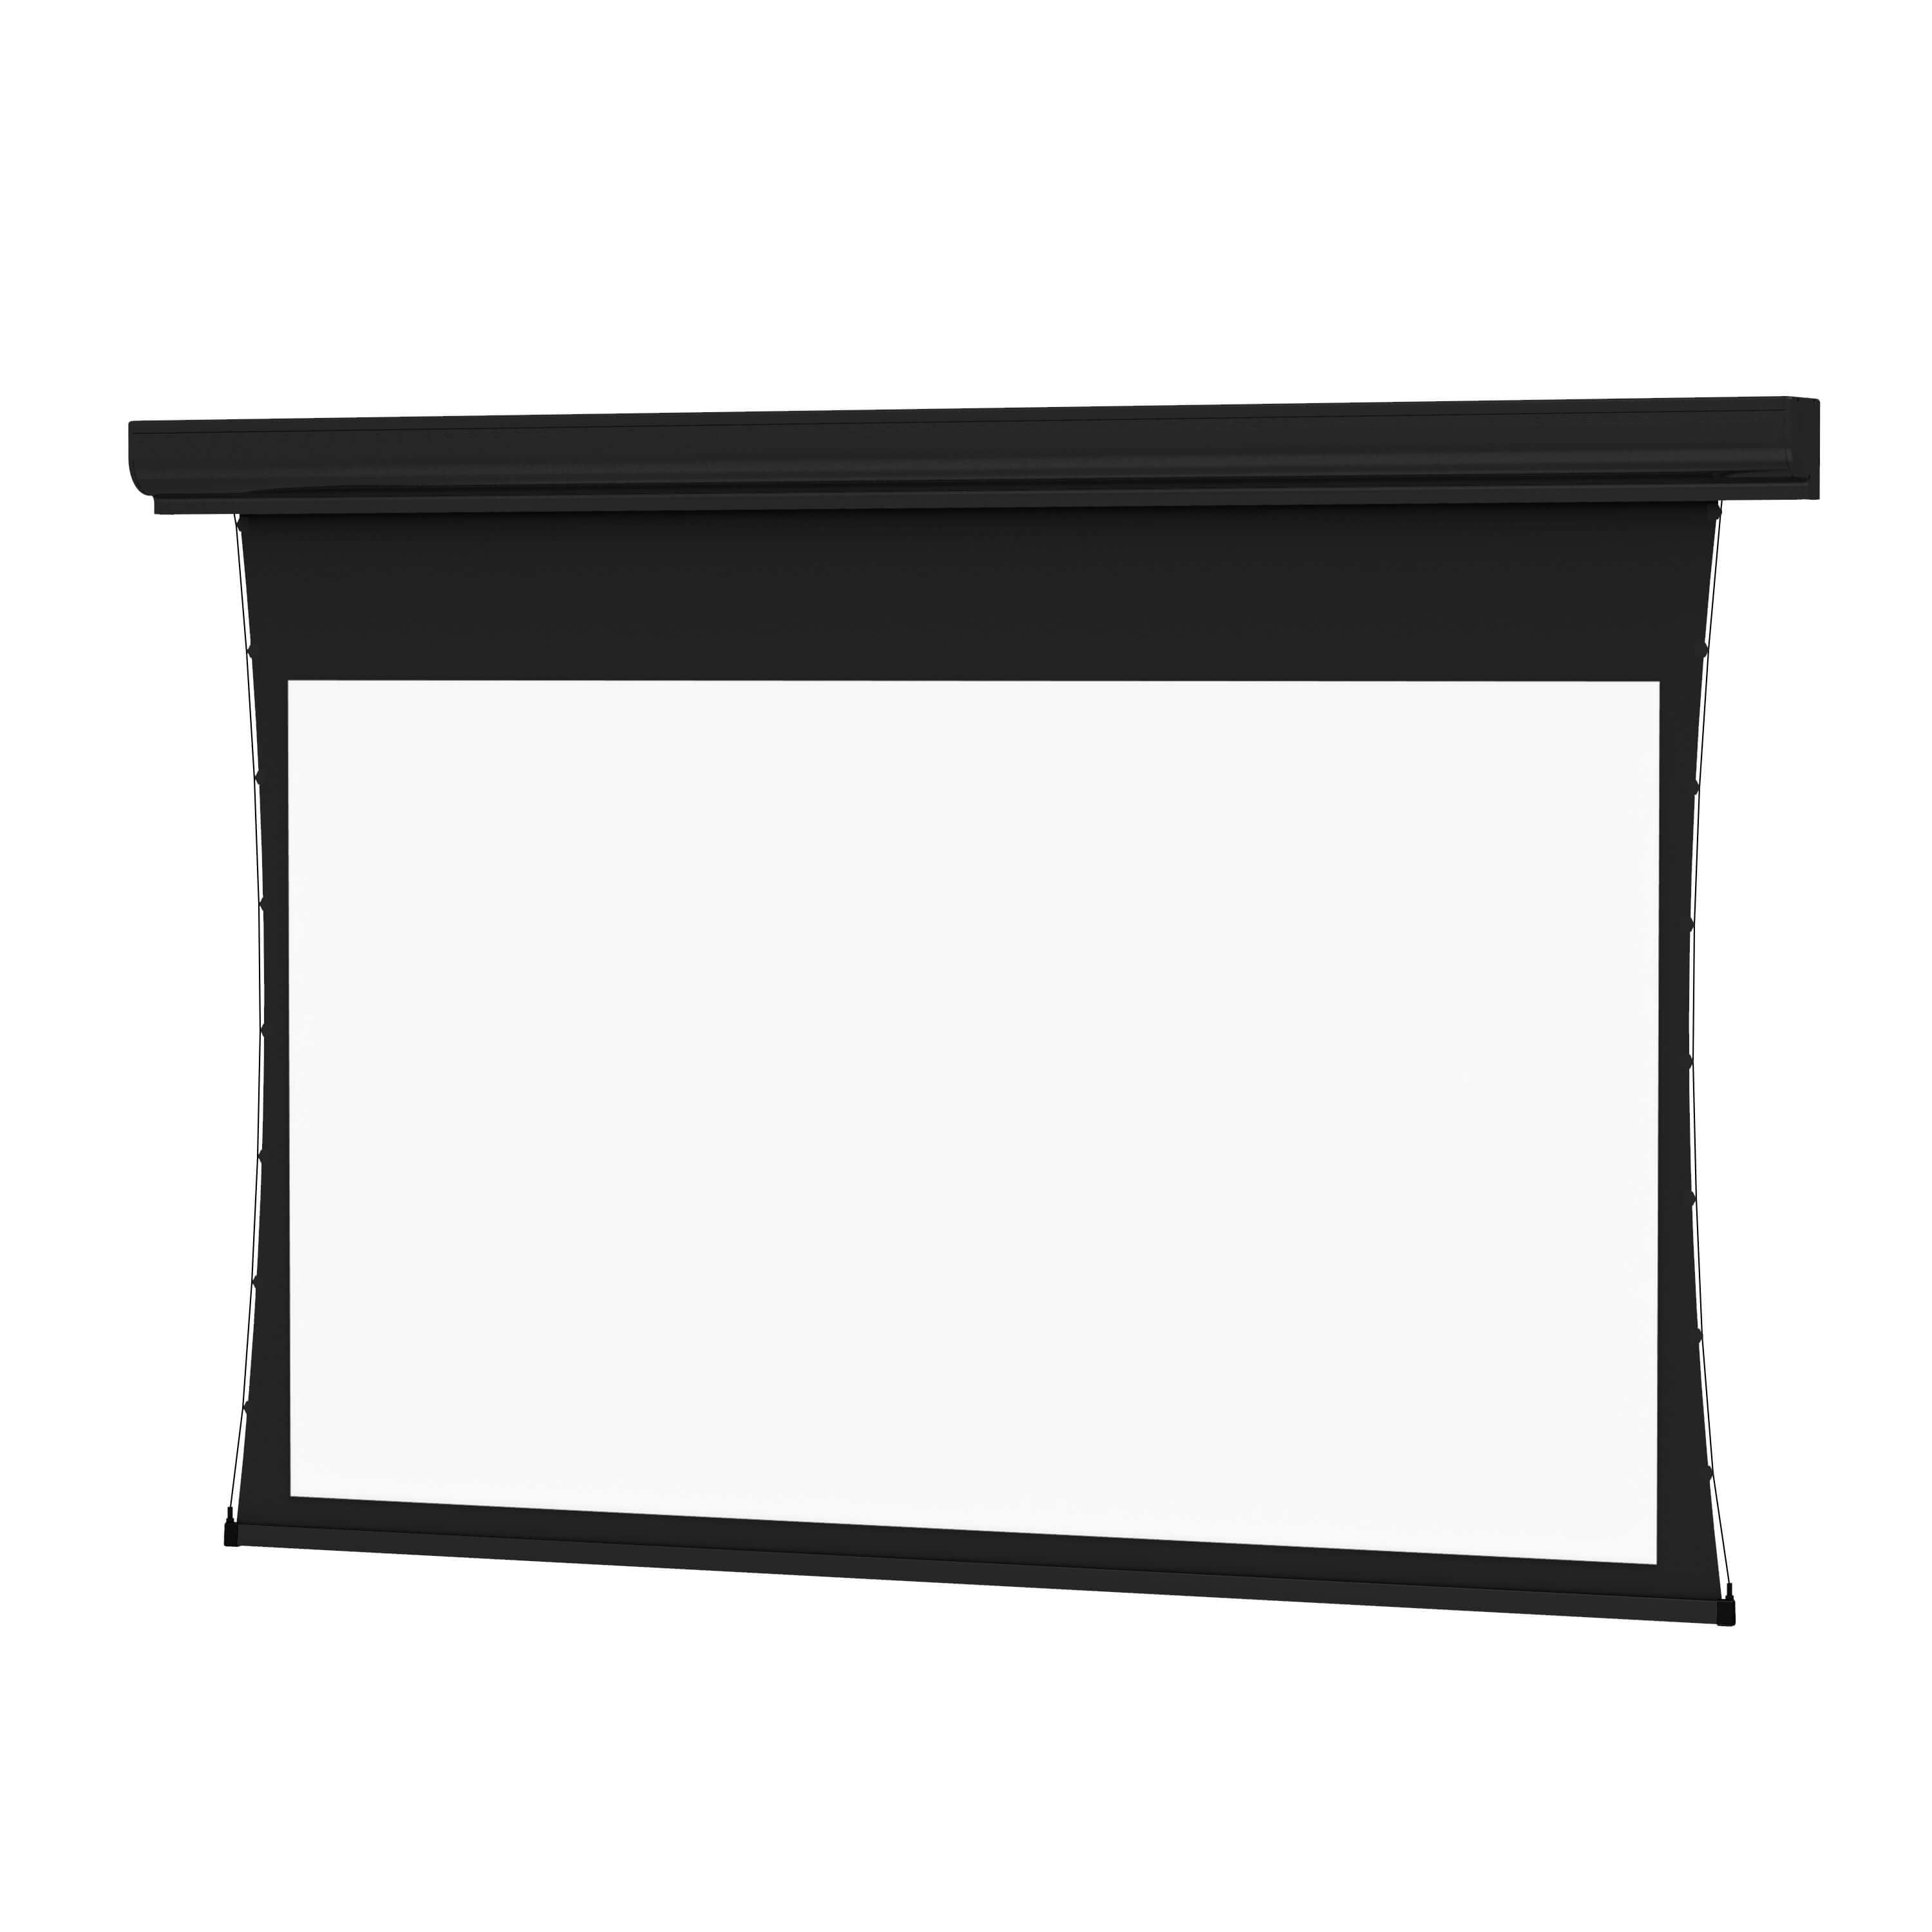 Da-Lite Tensioned Contour Electrol - Wall or Ceiling Mounted Electric Screen with black case